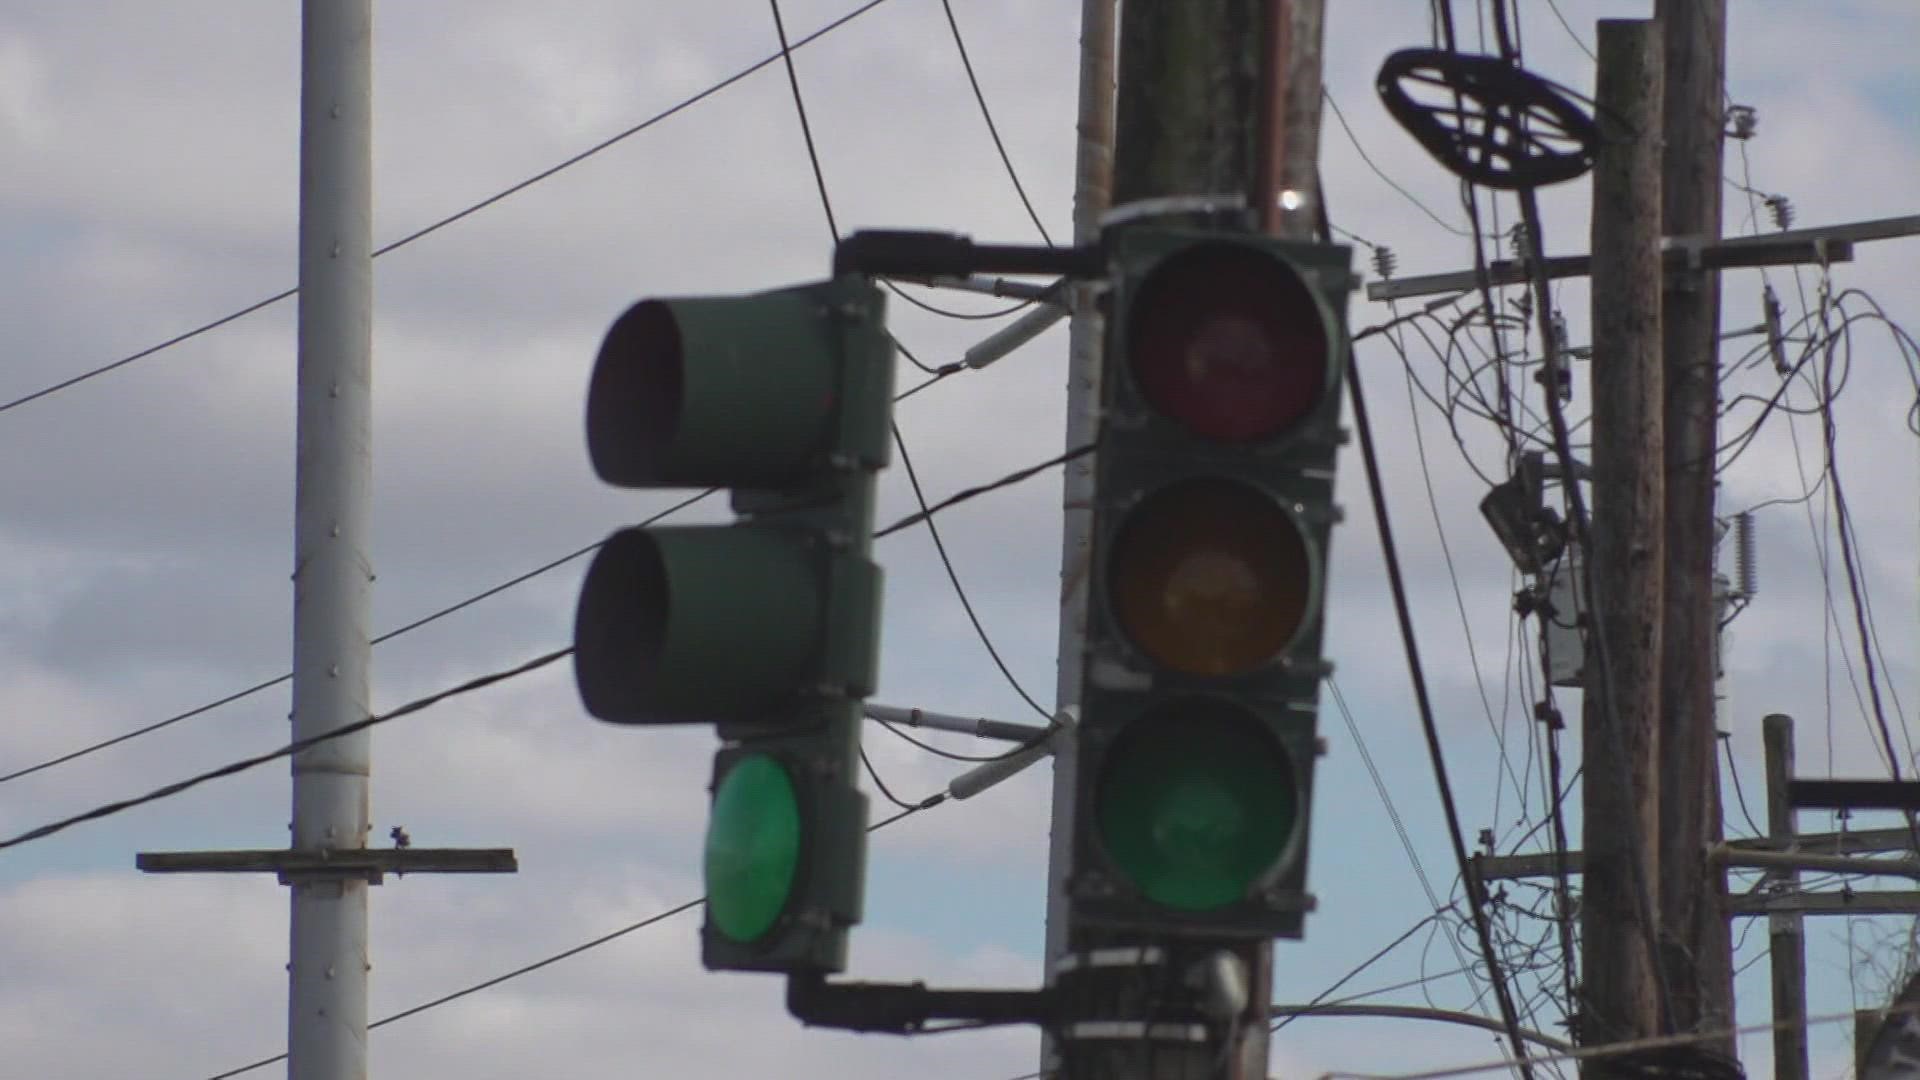 Wednesday, the Department of Public Works laid out their plan to fix the city's broken traffic lights.